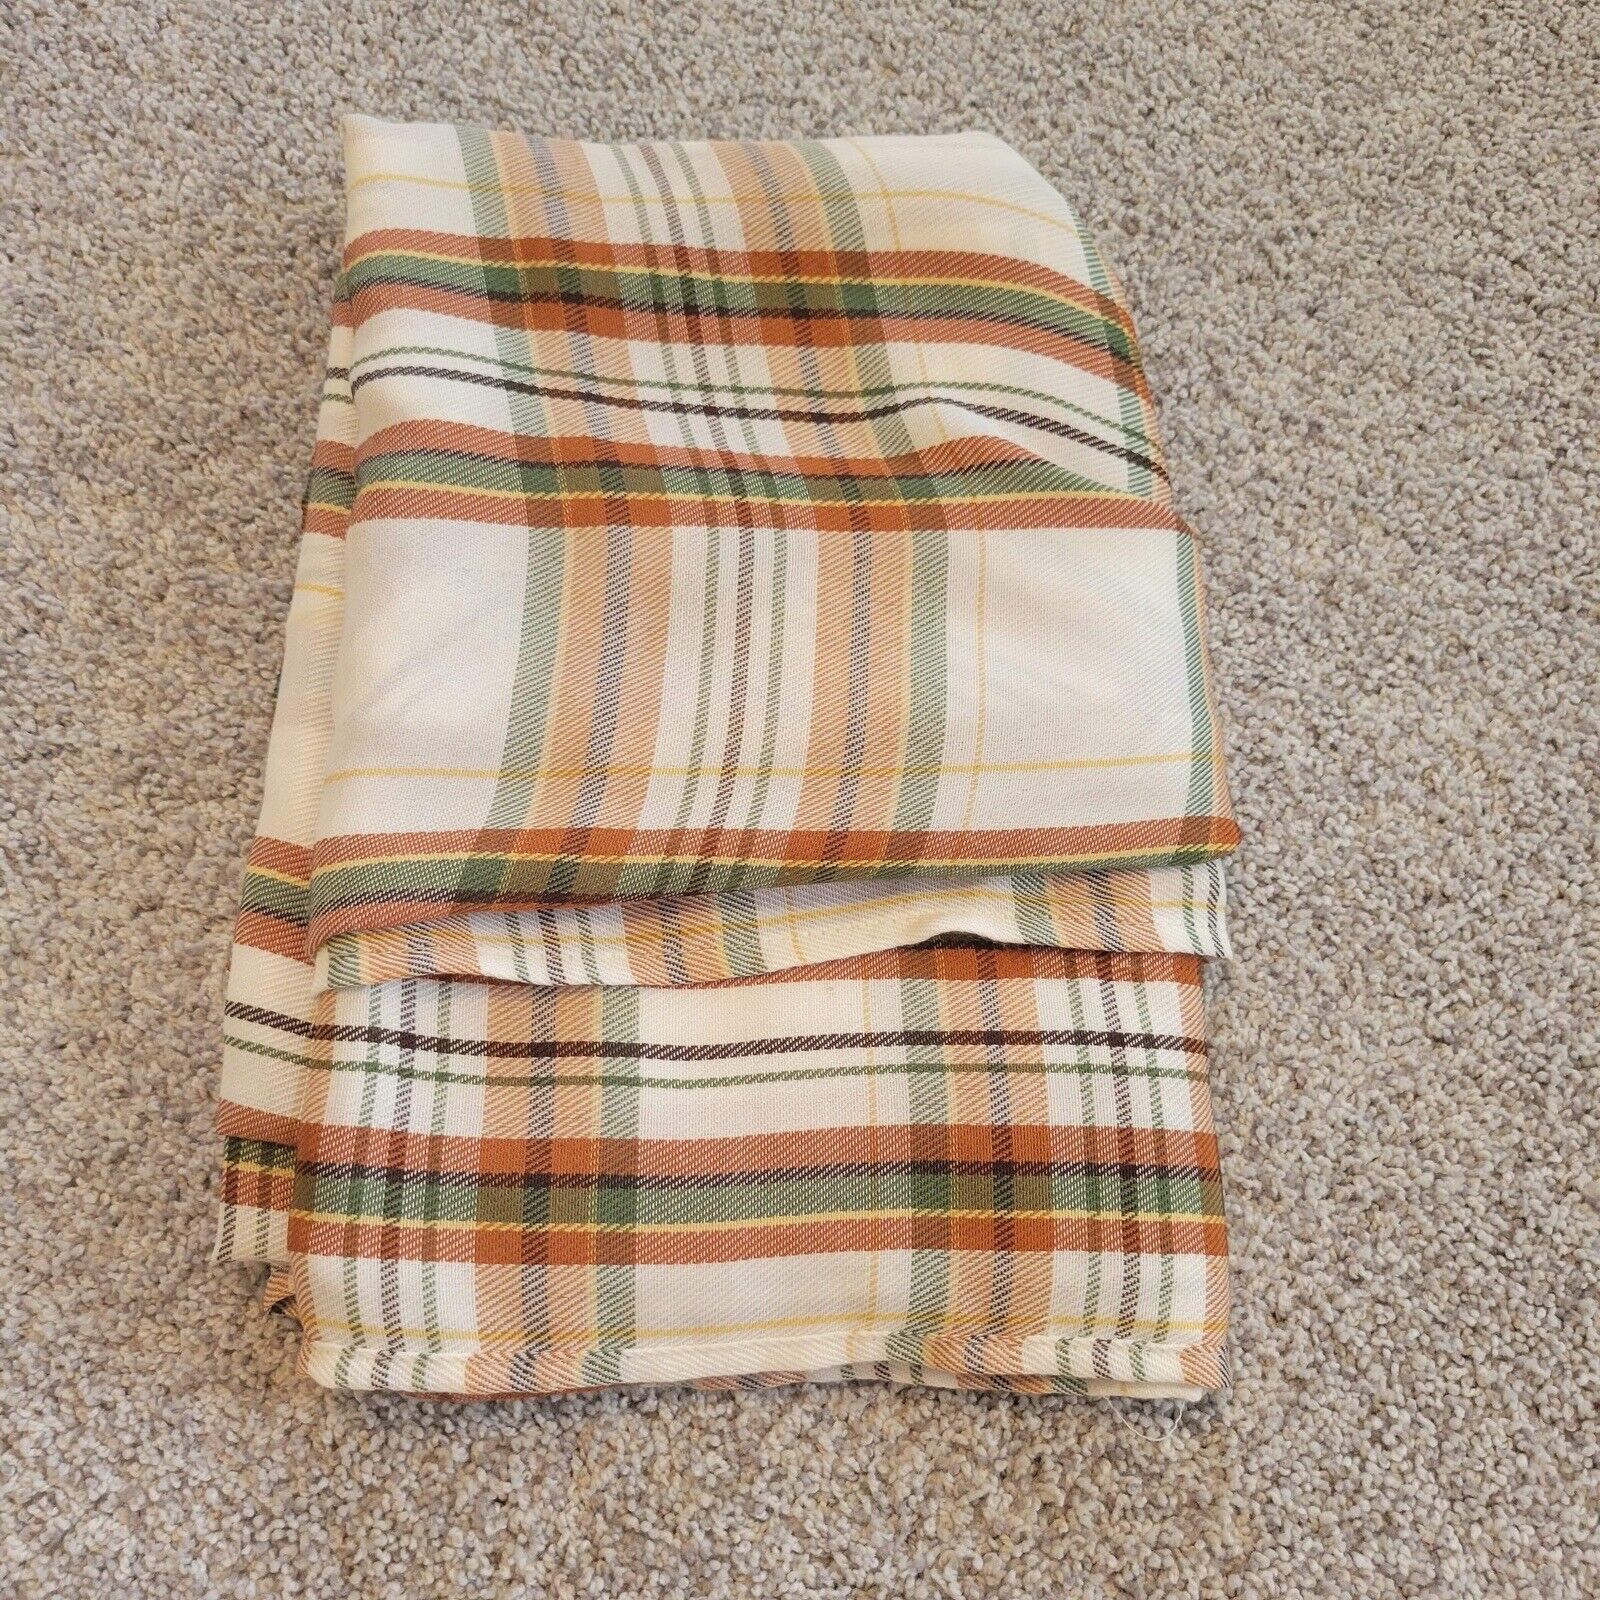 Plaid Tablecloth, Fall Colors: Orange, Green, Brown - 60in x 84in, Machine Wash